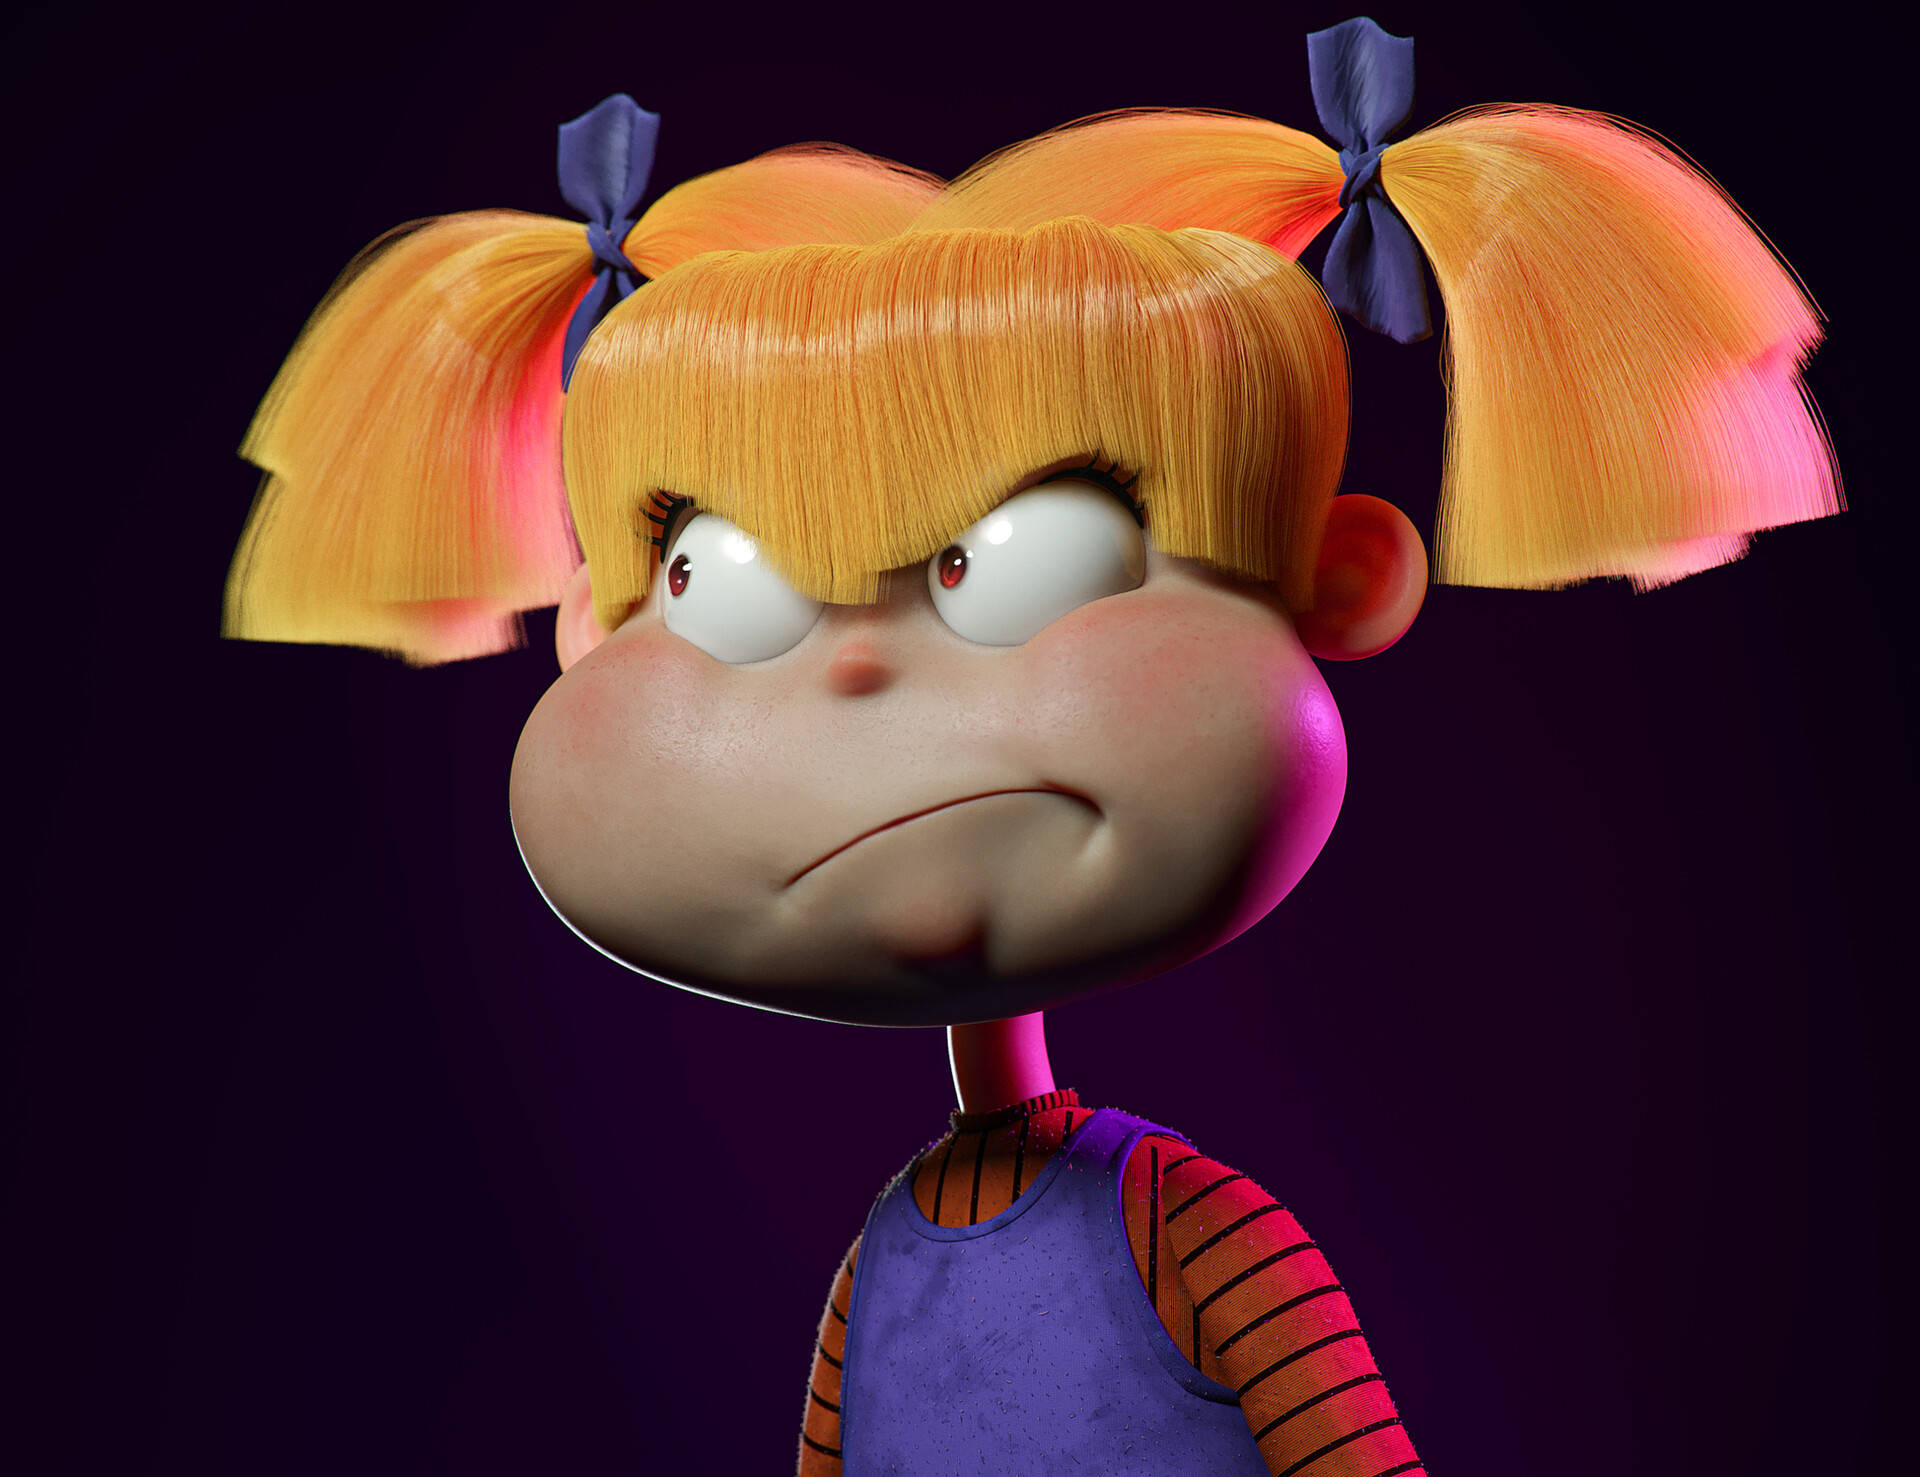 rugrats angelica angry